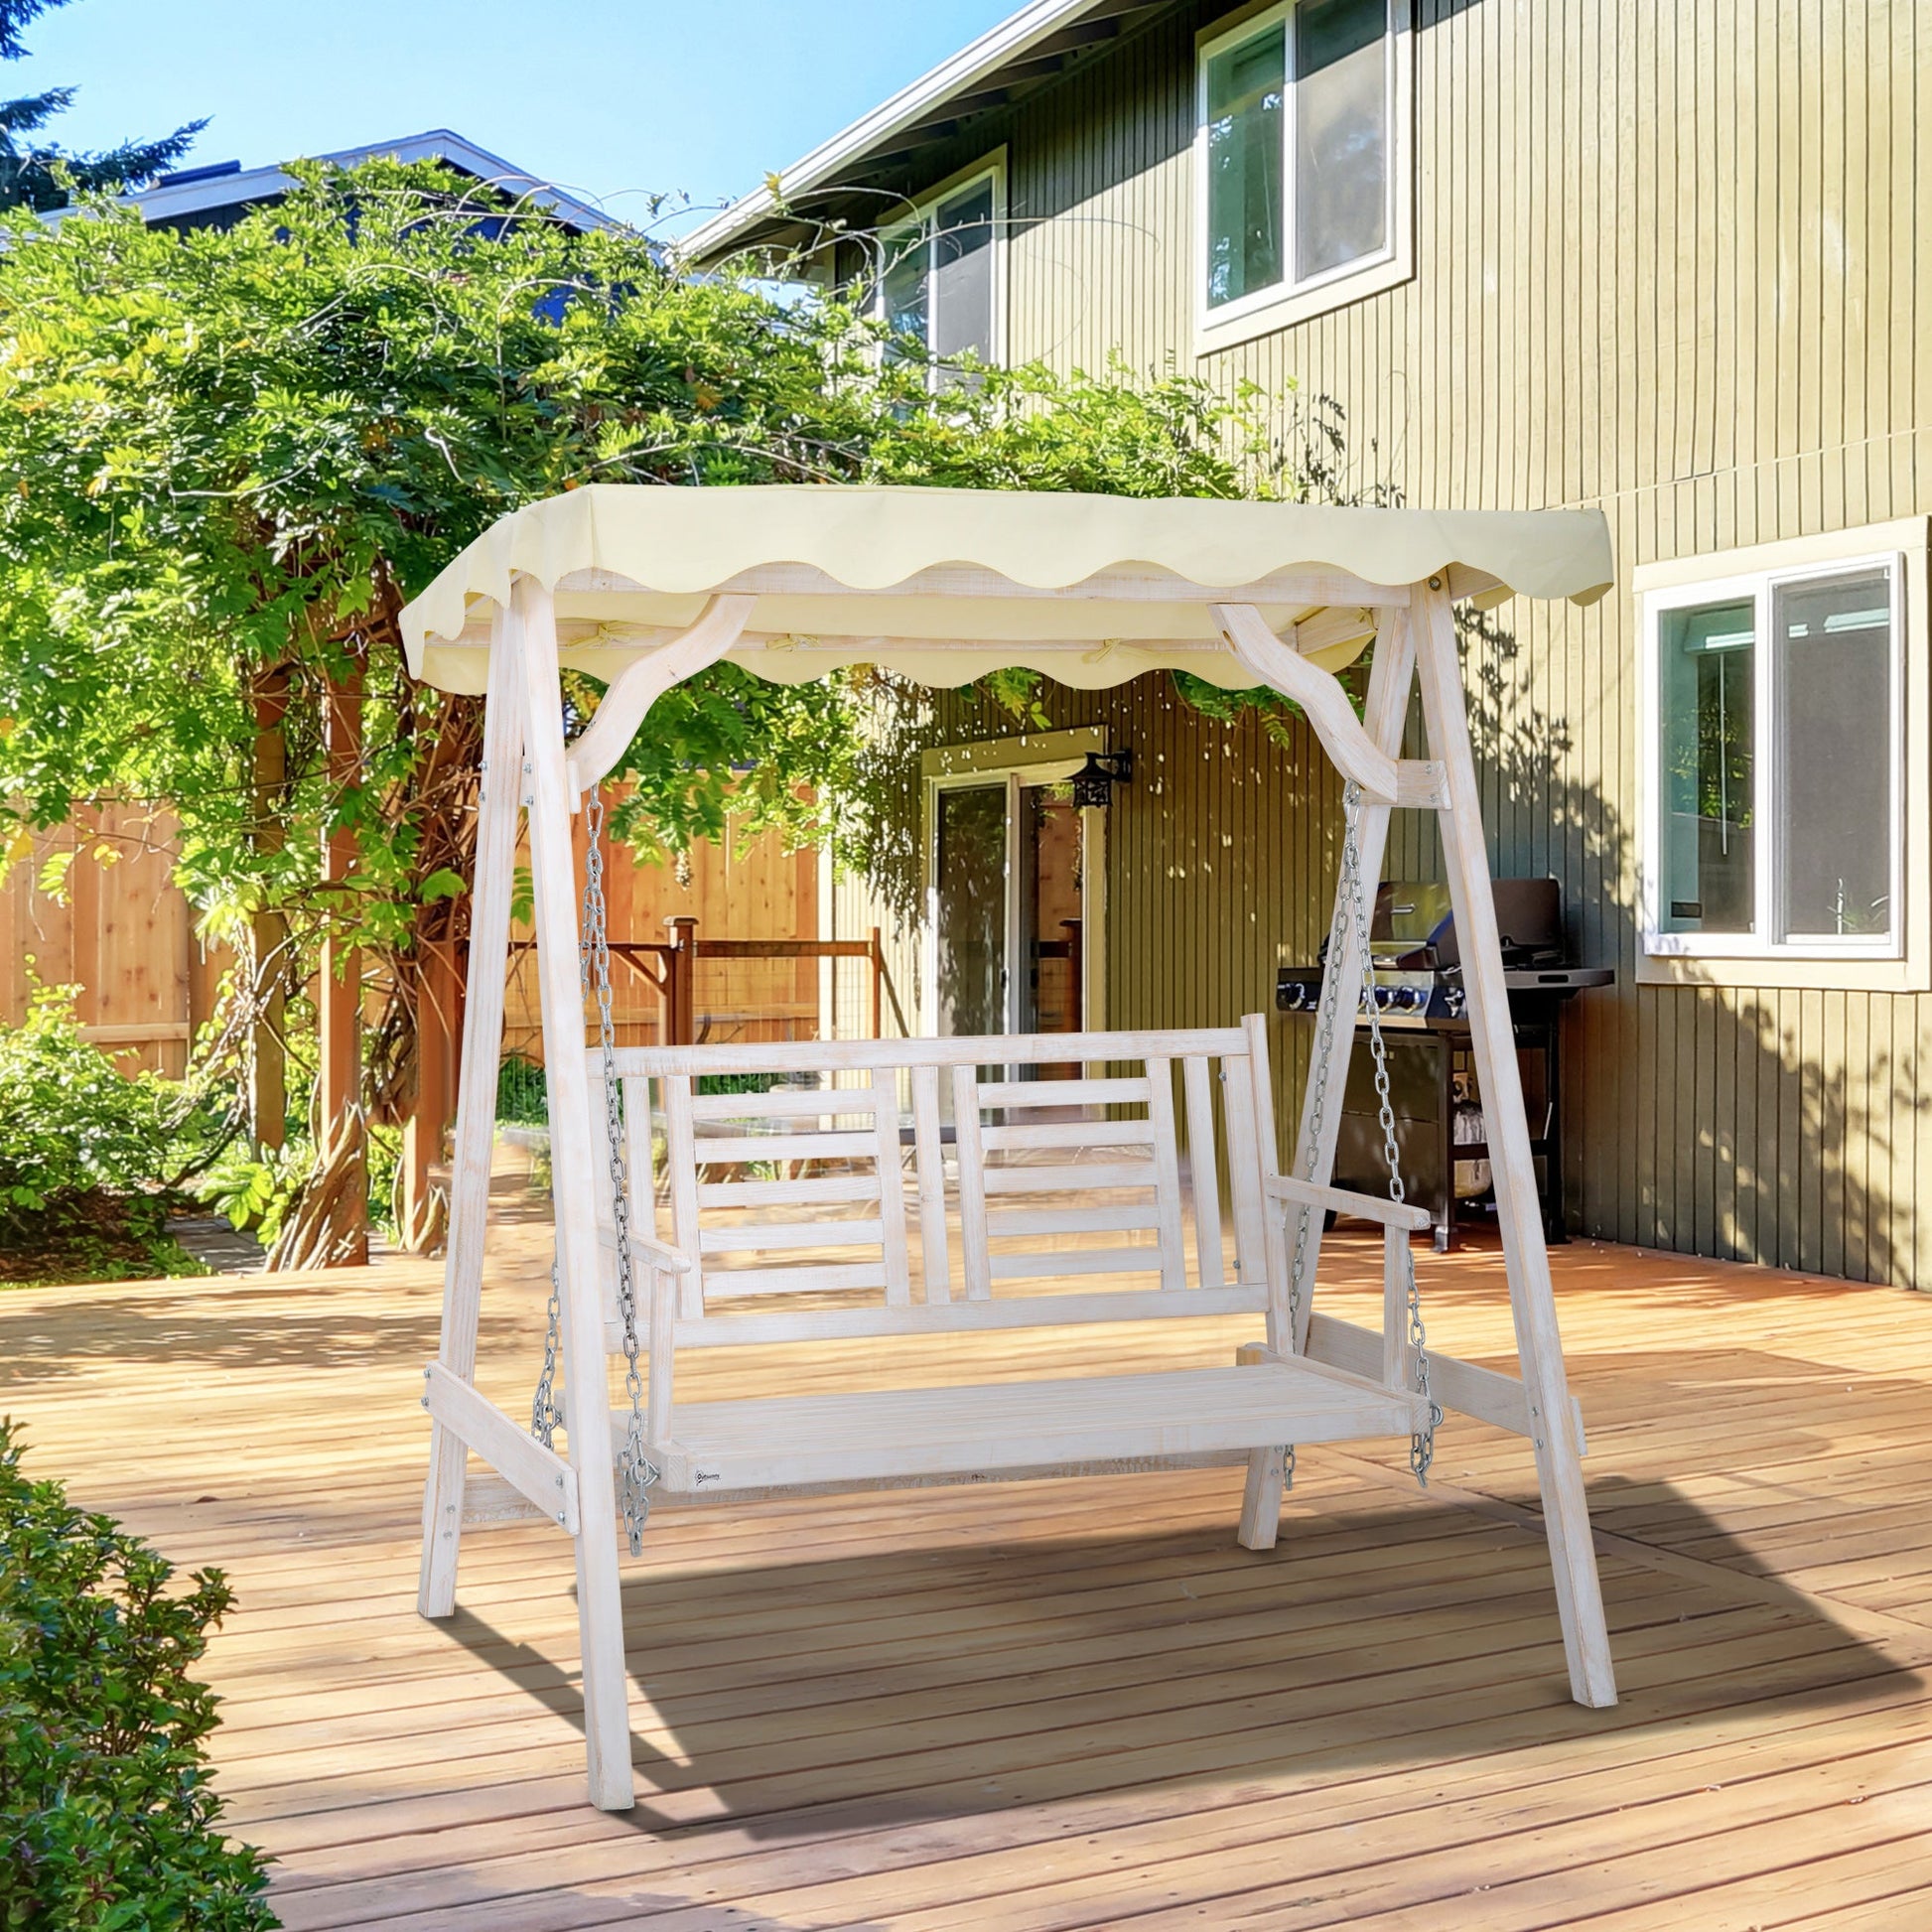 2 Seater Porch Swing w/ Stand, Canopy and Cushion, Outdoor Swing Chair Wooden Swinging Bench - Gallery Canada